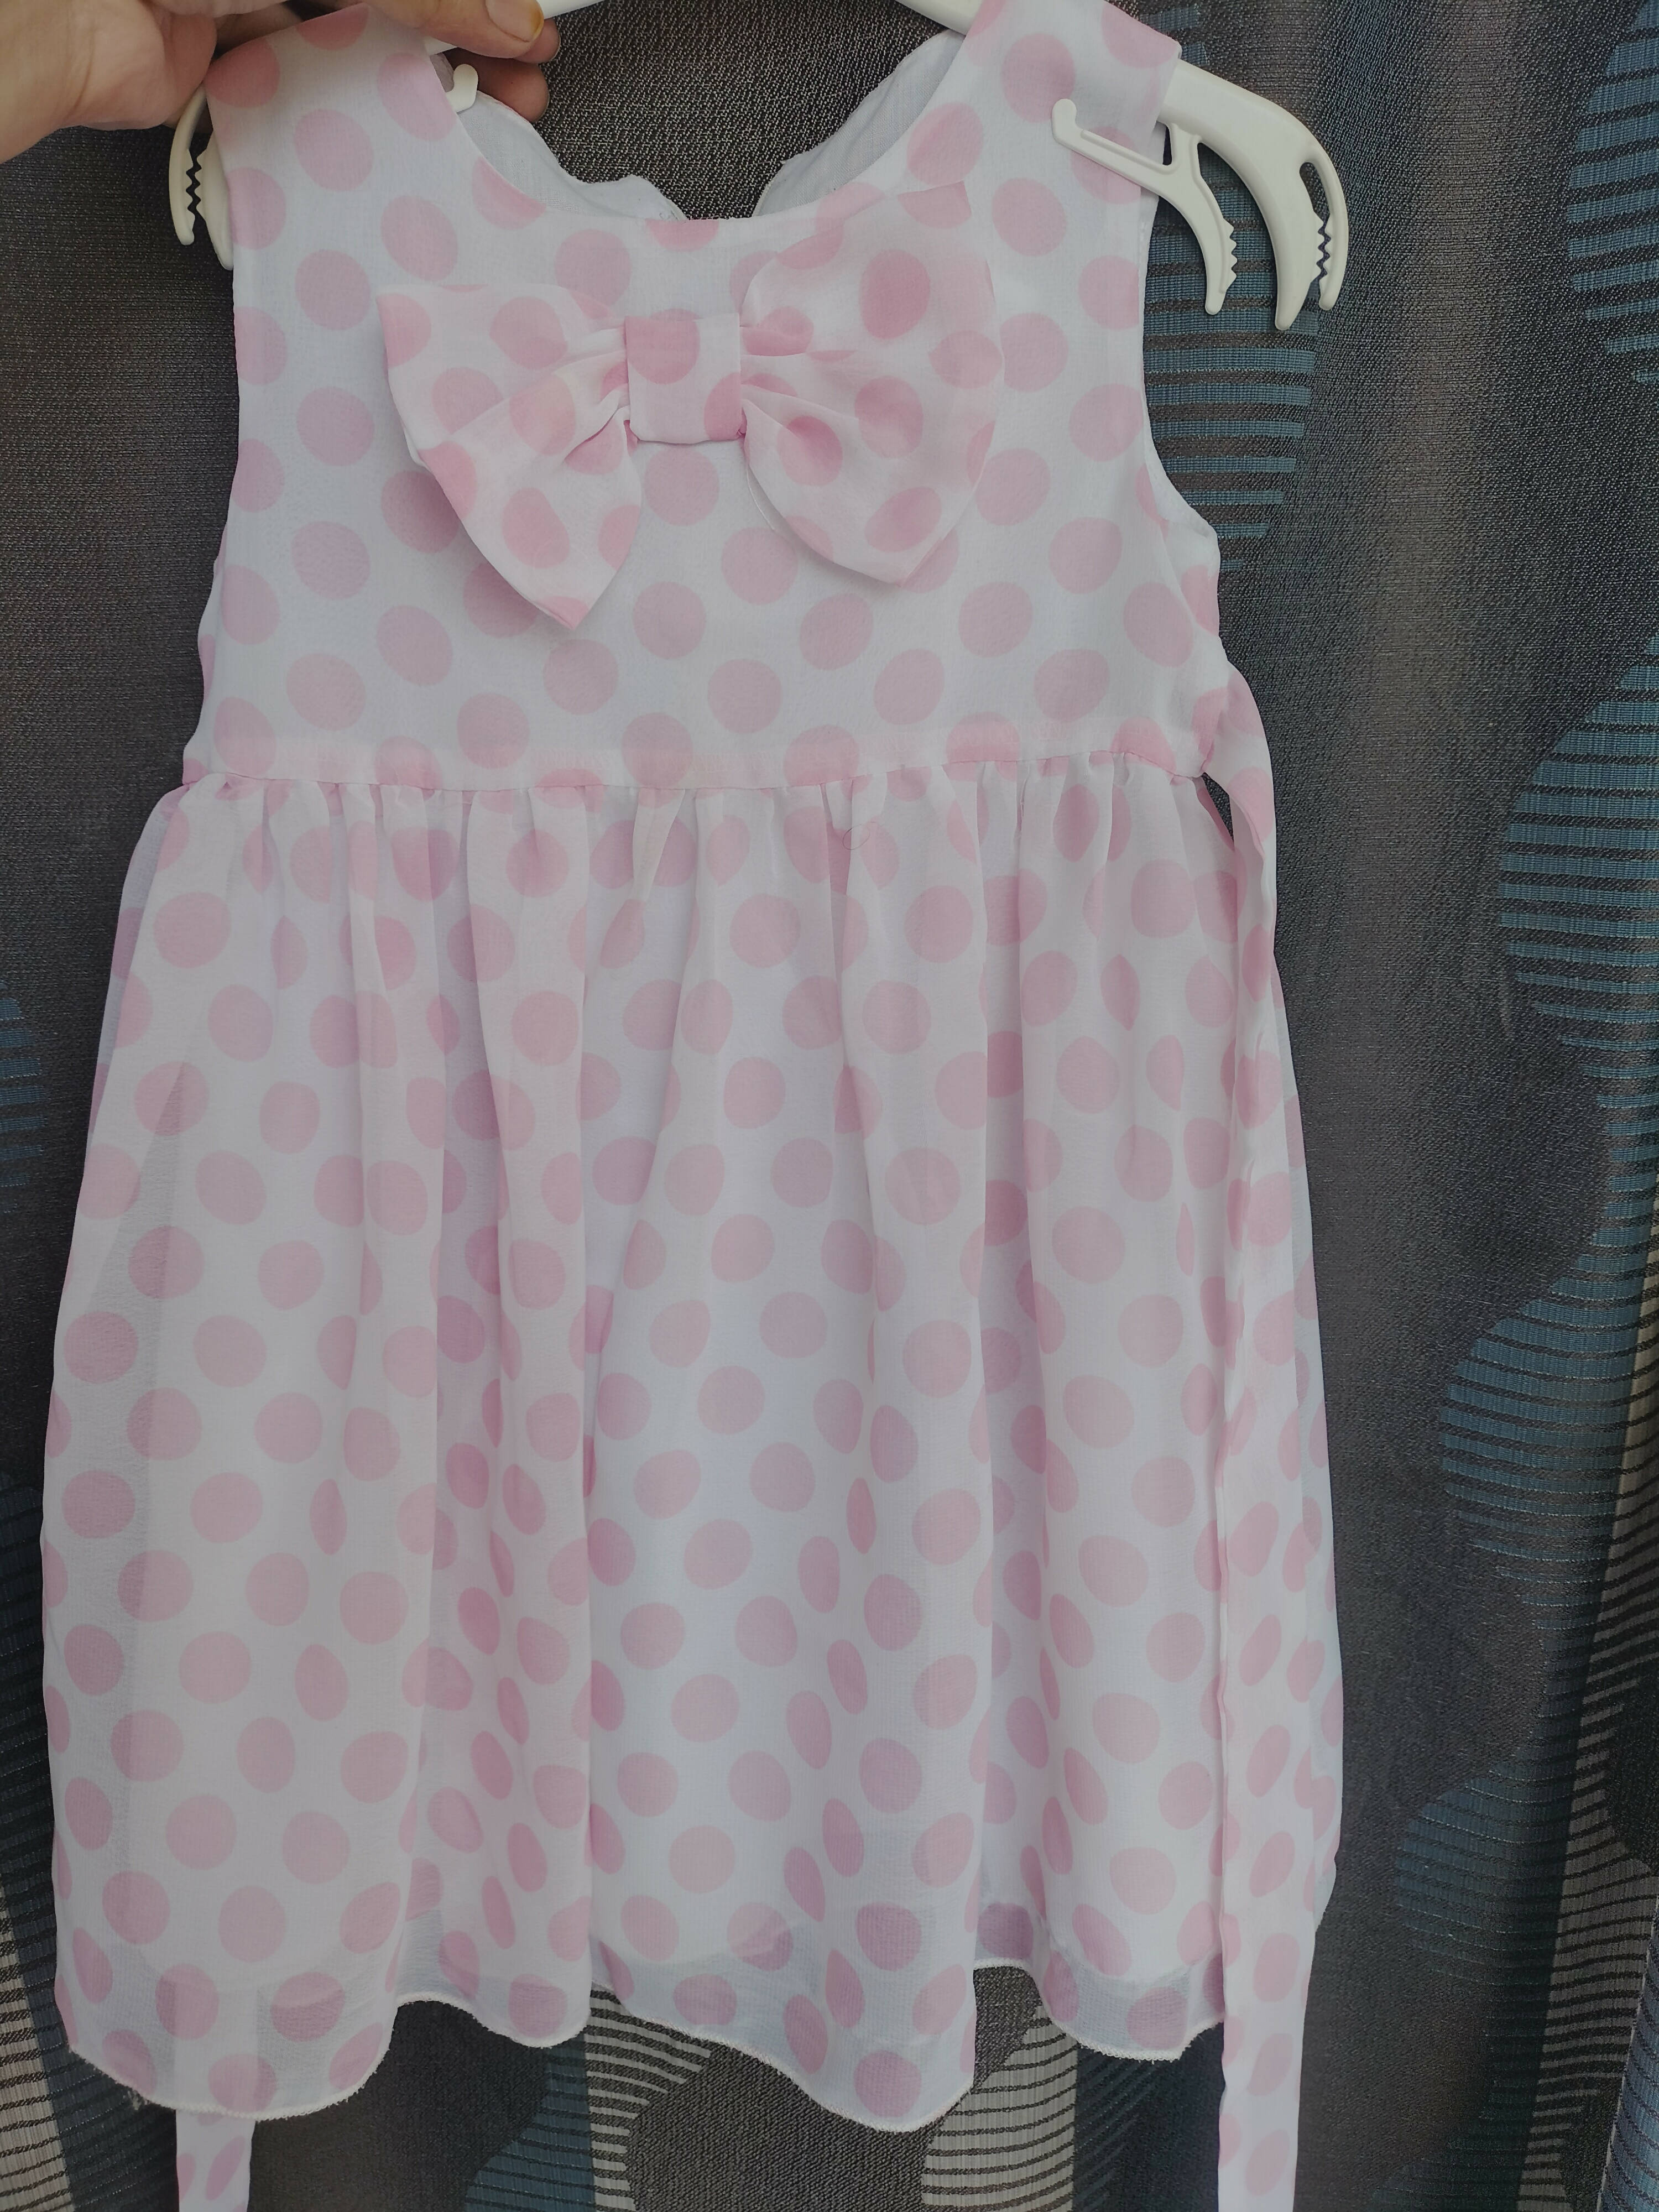 Pink Baby girl frock (2-3 years) | Girls Skirts & Dresses | Preloved